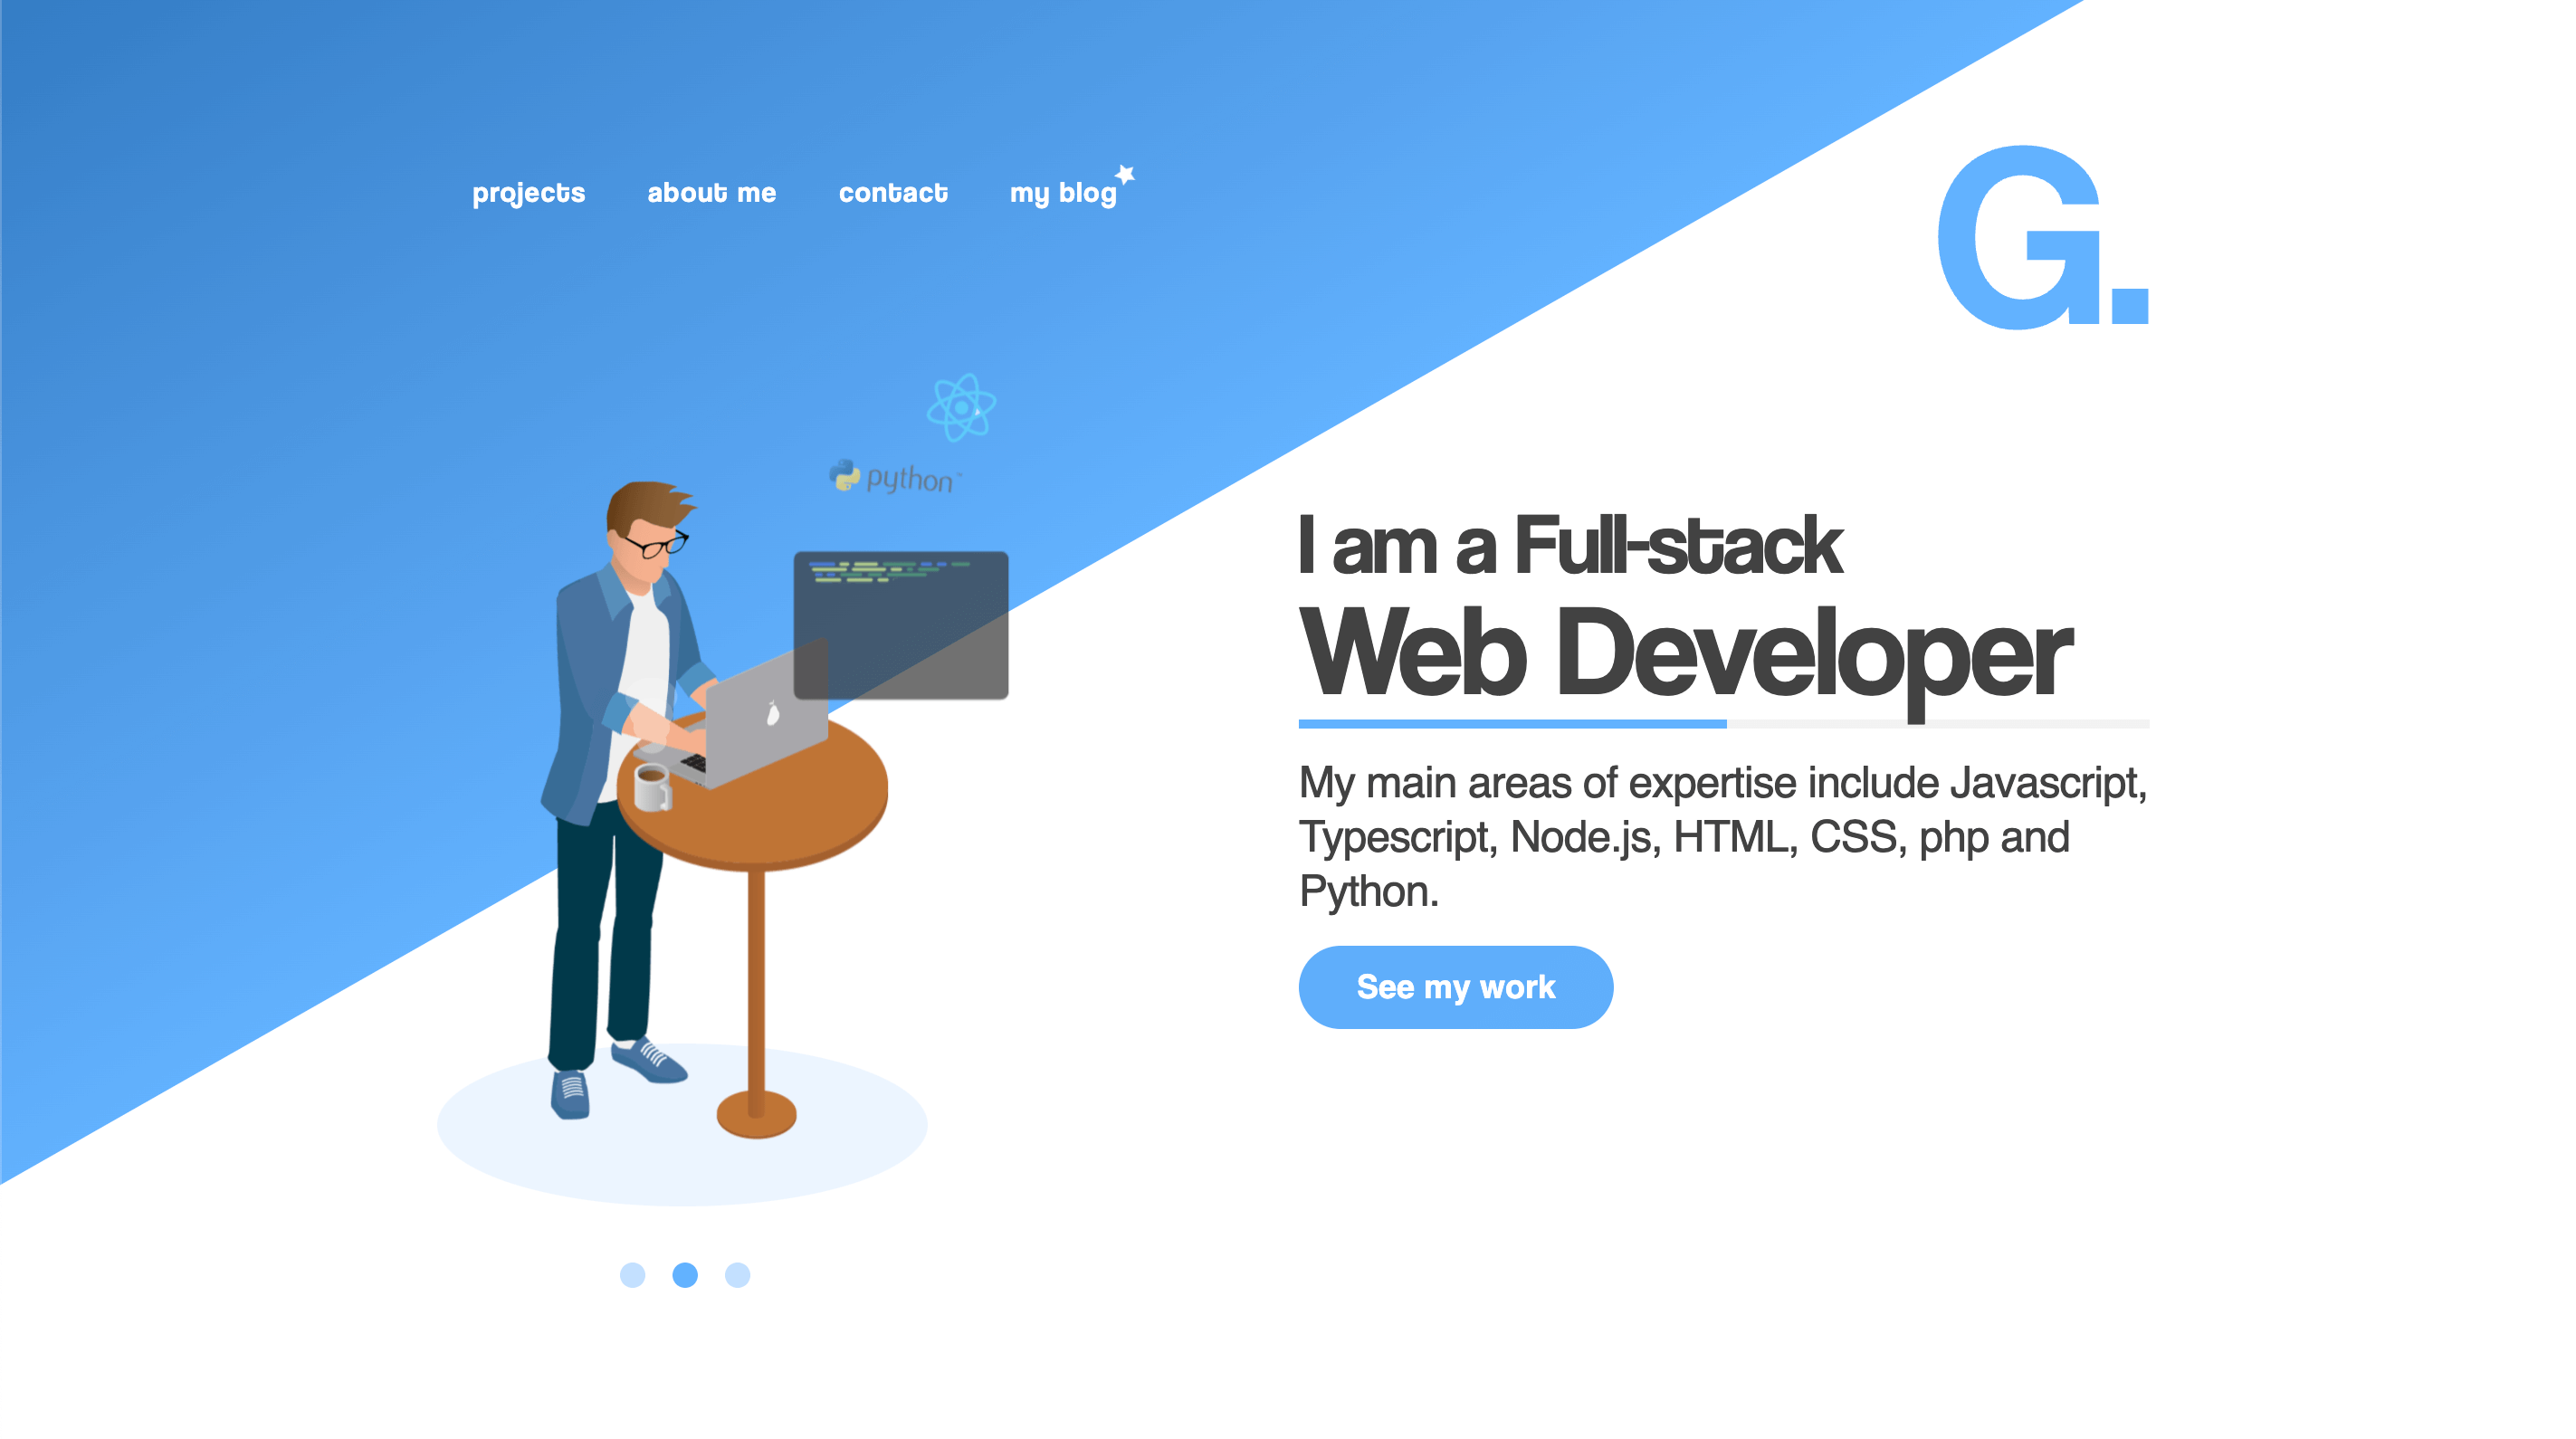 Andris Gauracs' resume website featuring an animated self portrait next to the text "I am a full-stack web developer. My main areas of expertise include Javascript, Typescript, Node.js, HTML, CSS, php, and Python."